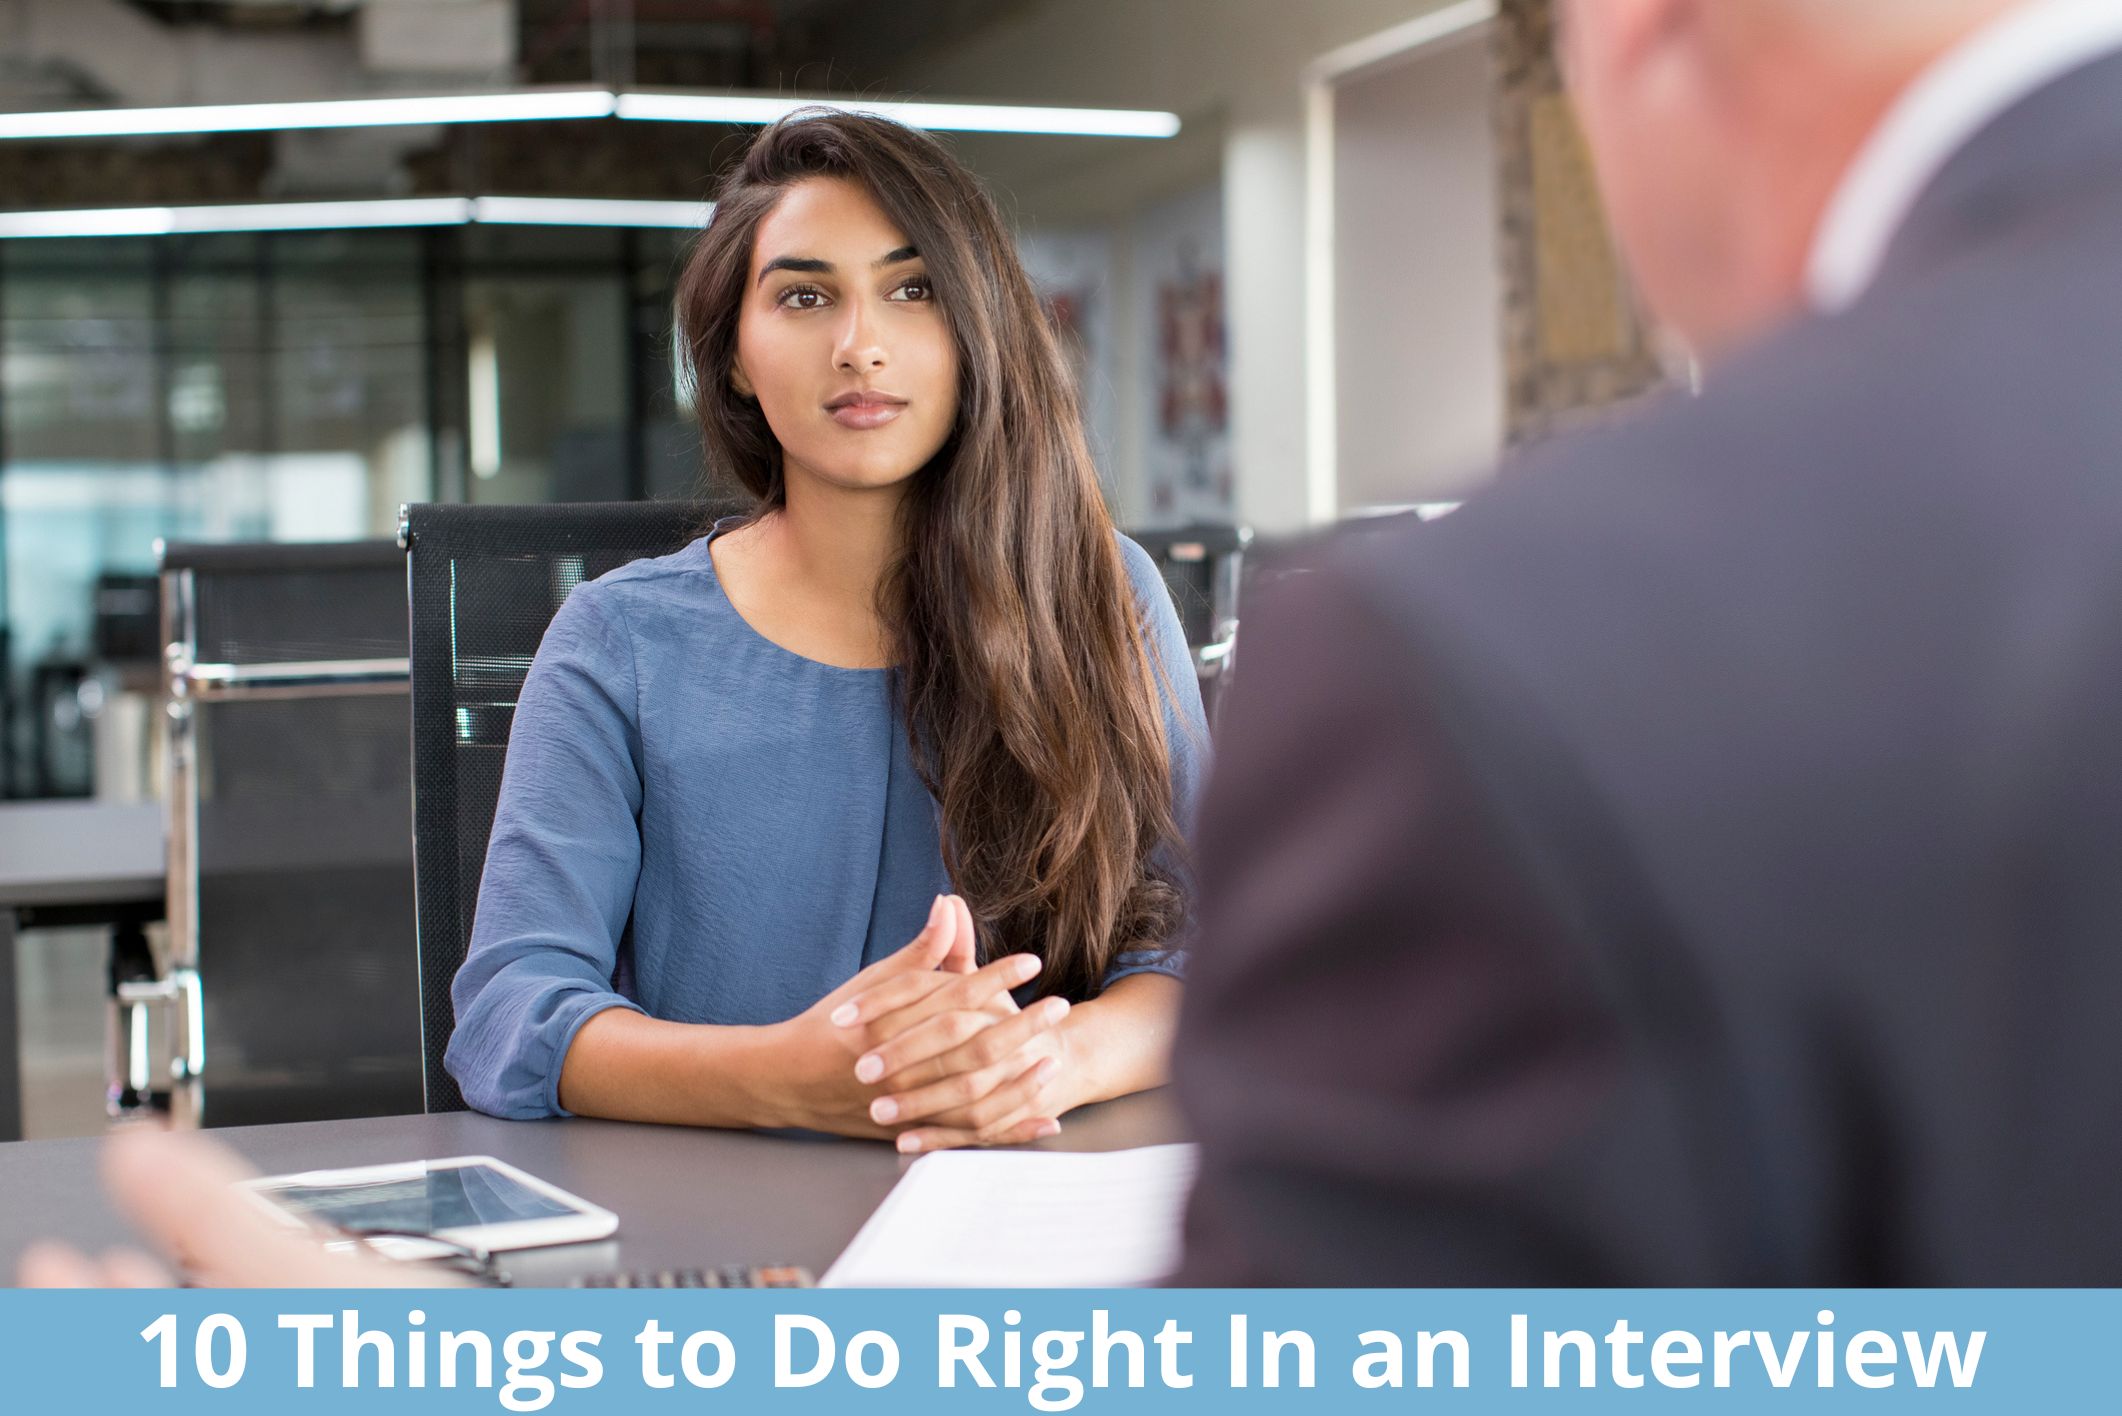 10 Things to Do Right In an Interview